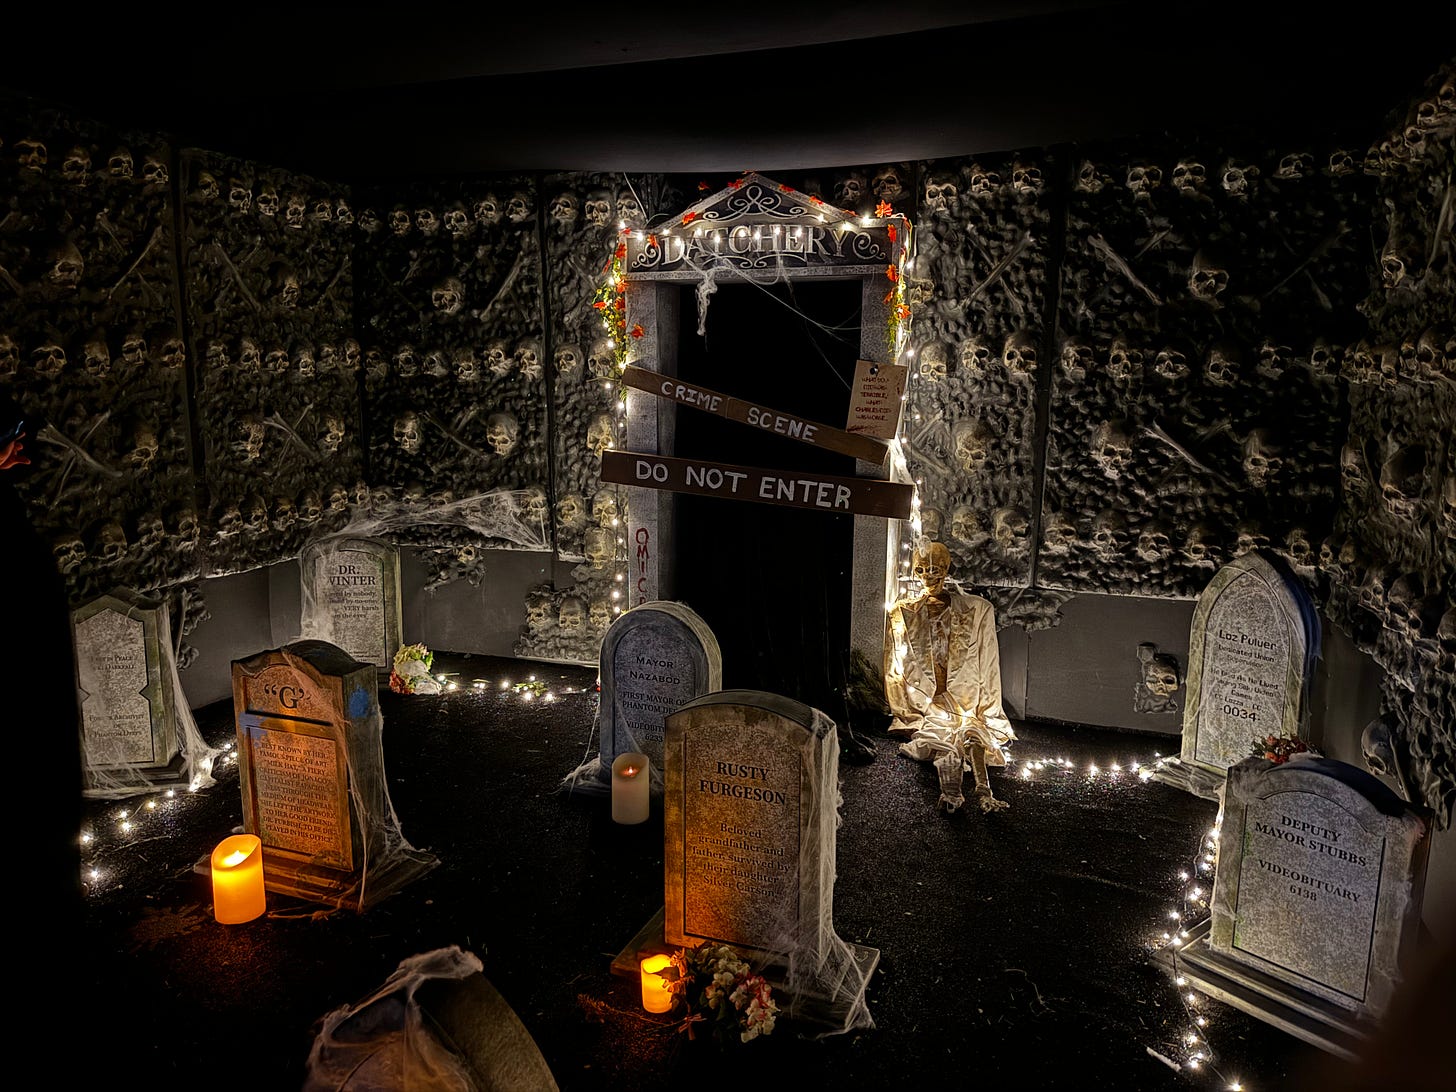 A dark crypt with gravestones each with codes and words